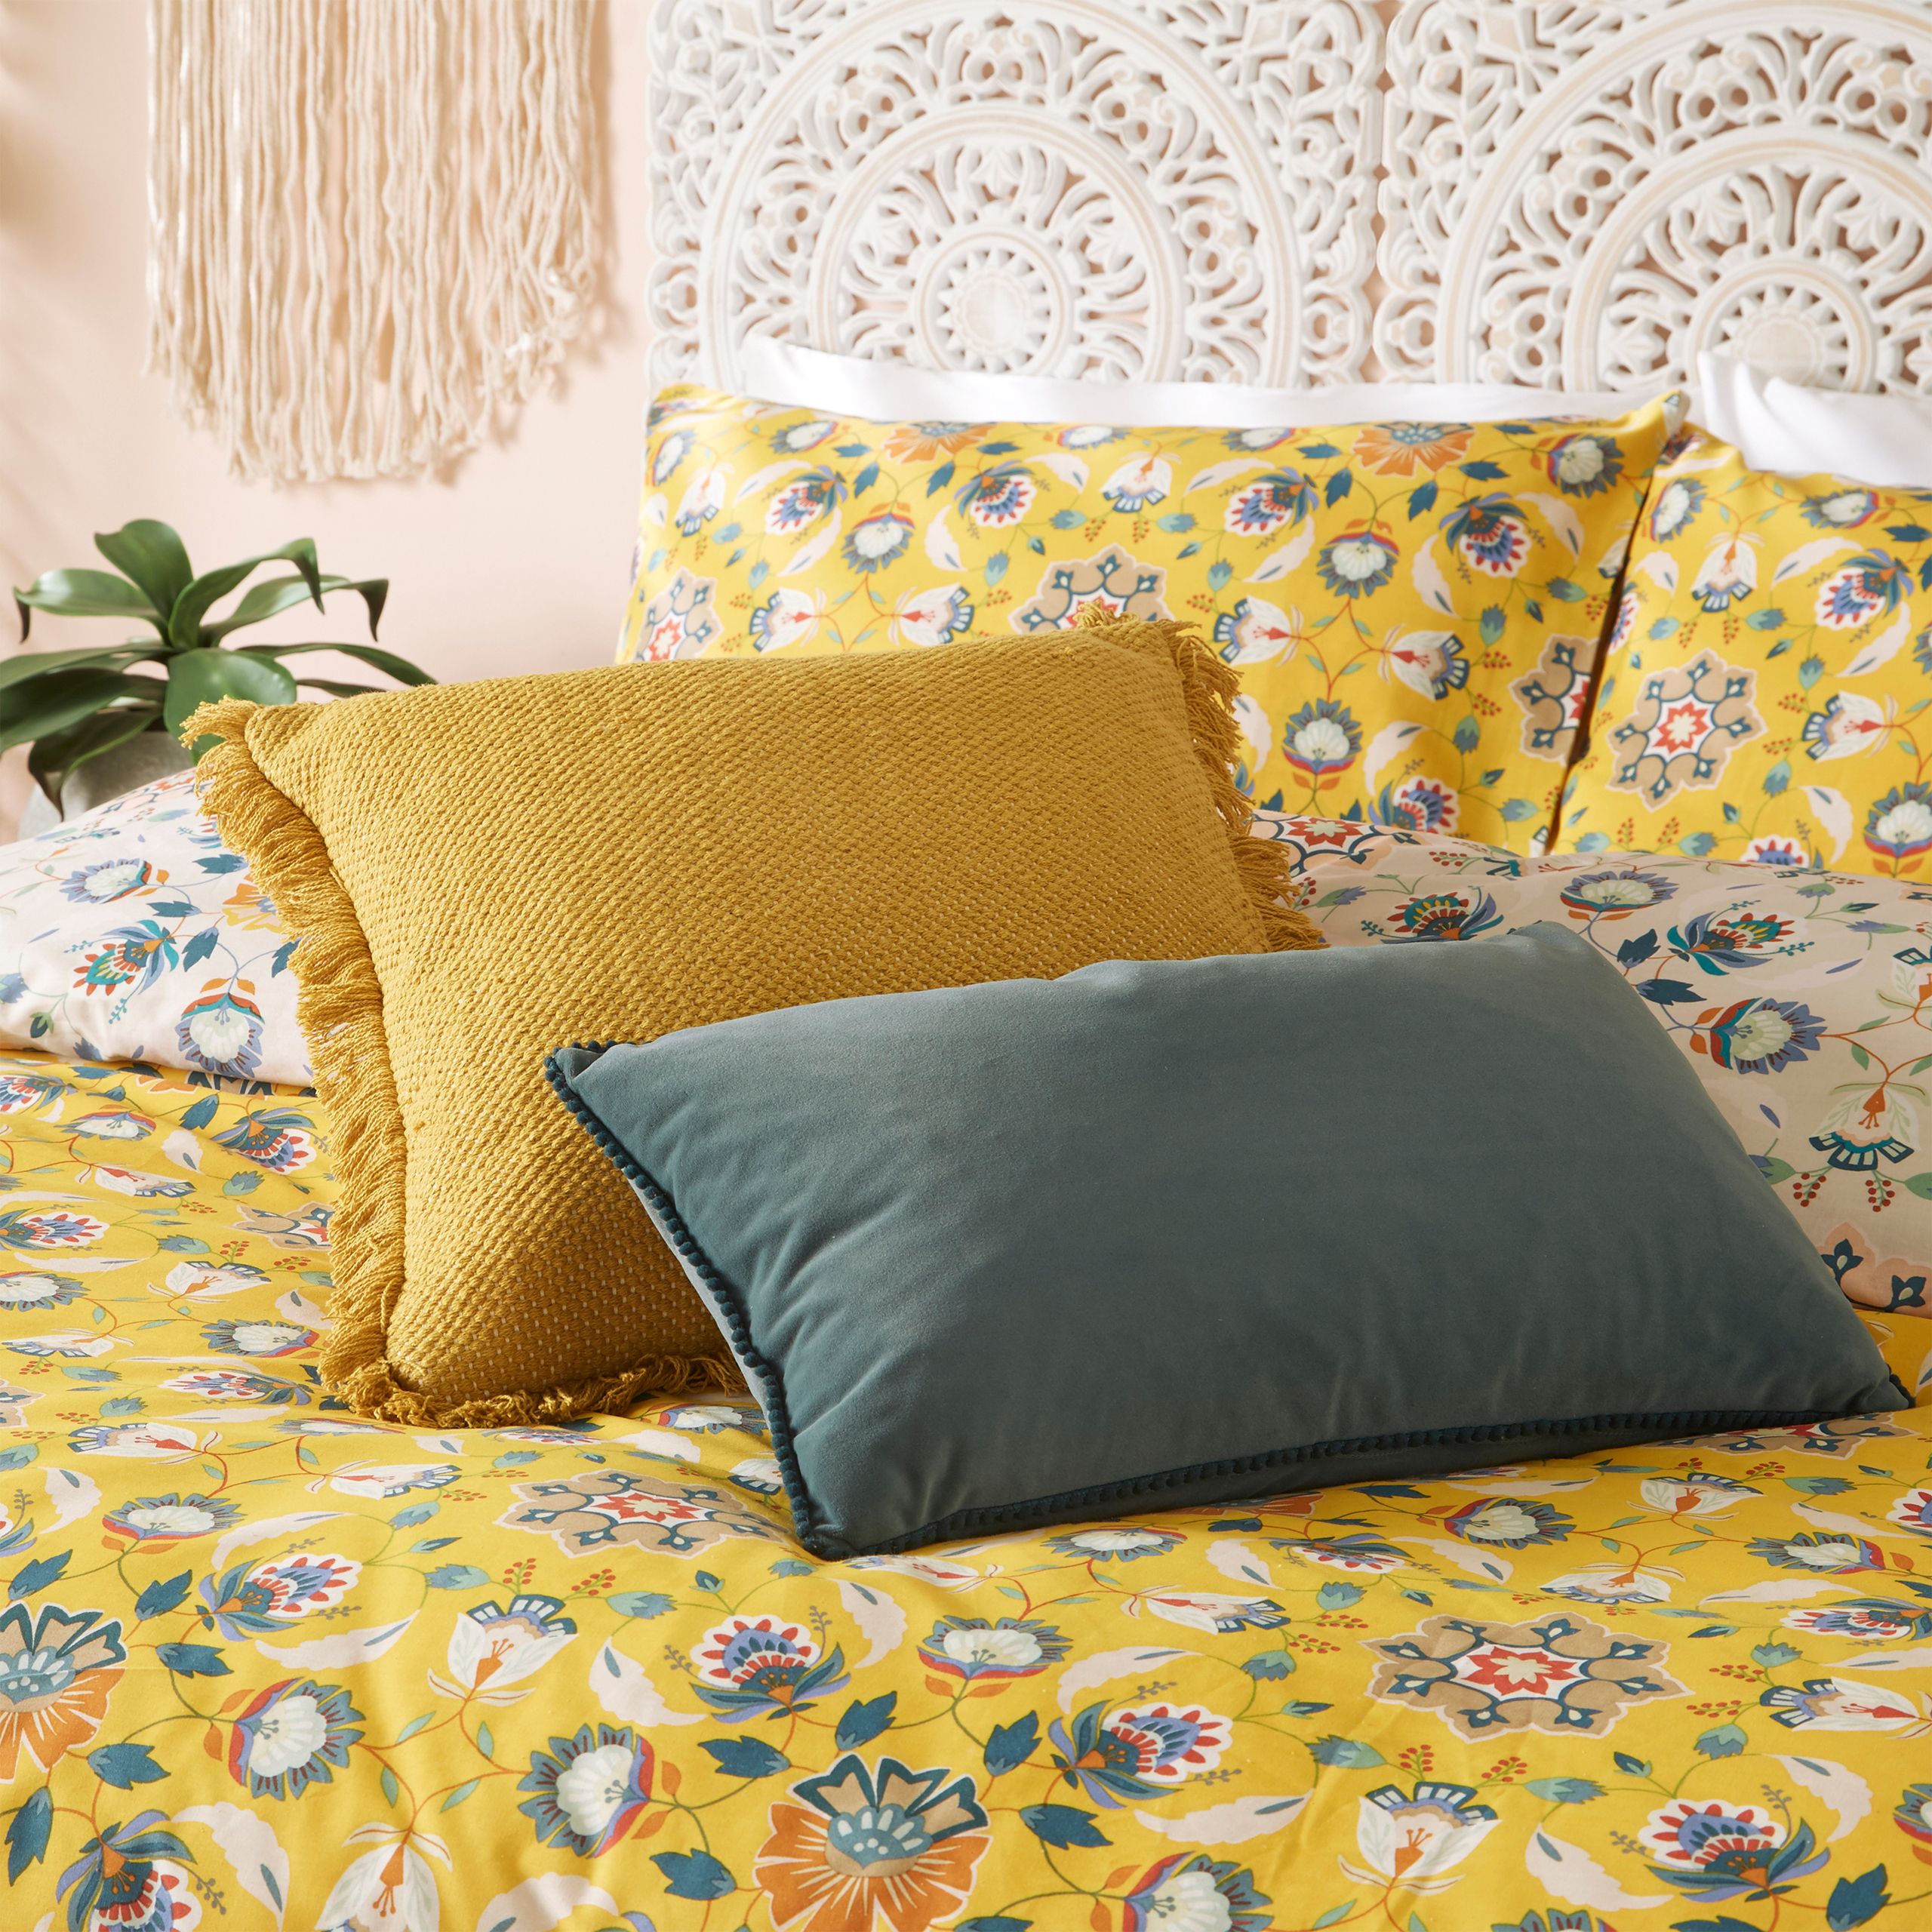 Instantly transform your bedroom with our Folk Flora bedding, inspired by traditional folk art and vibrant foral tones. Featuring a fully reversible design, so you get two looks in one, perfect for switching over to suit your mood or décor.